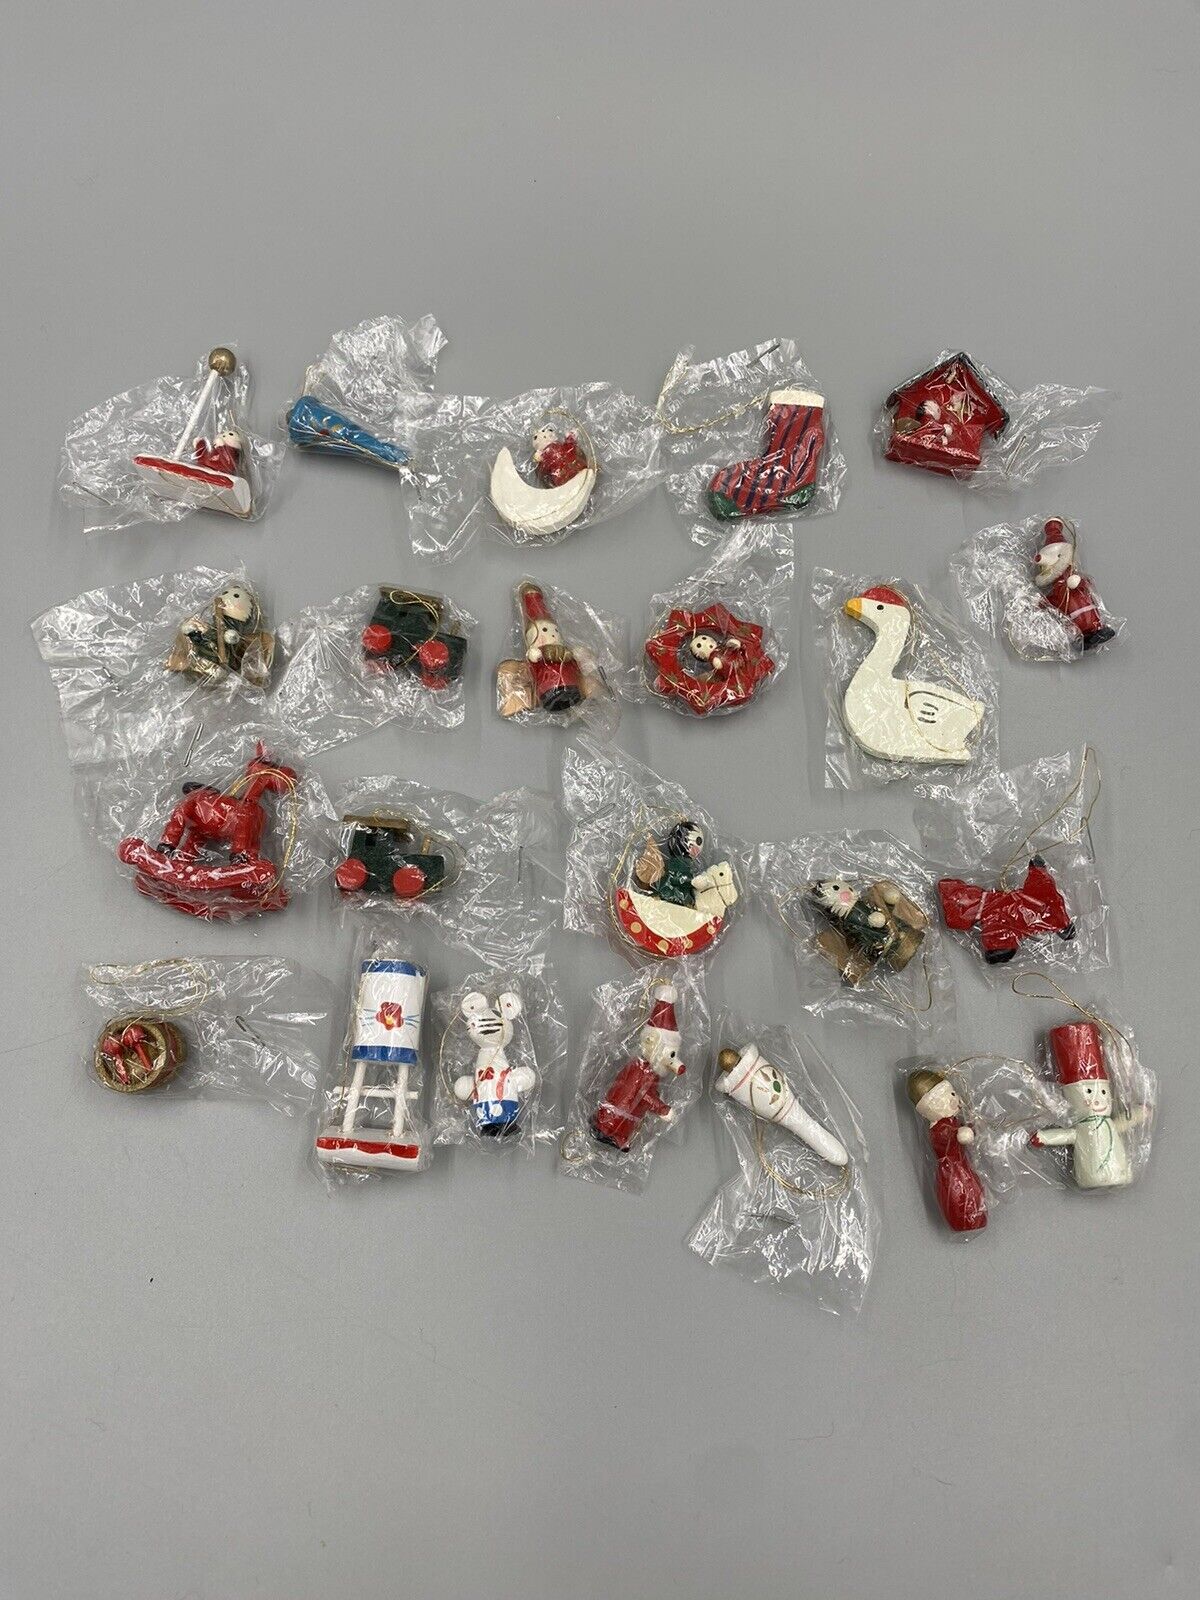 Lot of 20 Miniature Wooden Christmas Tree Ornaments Hand Painted